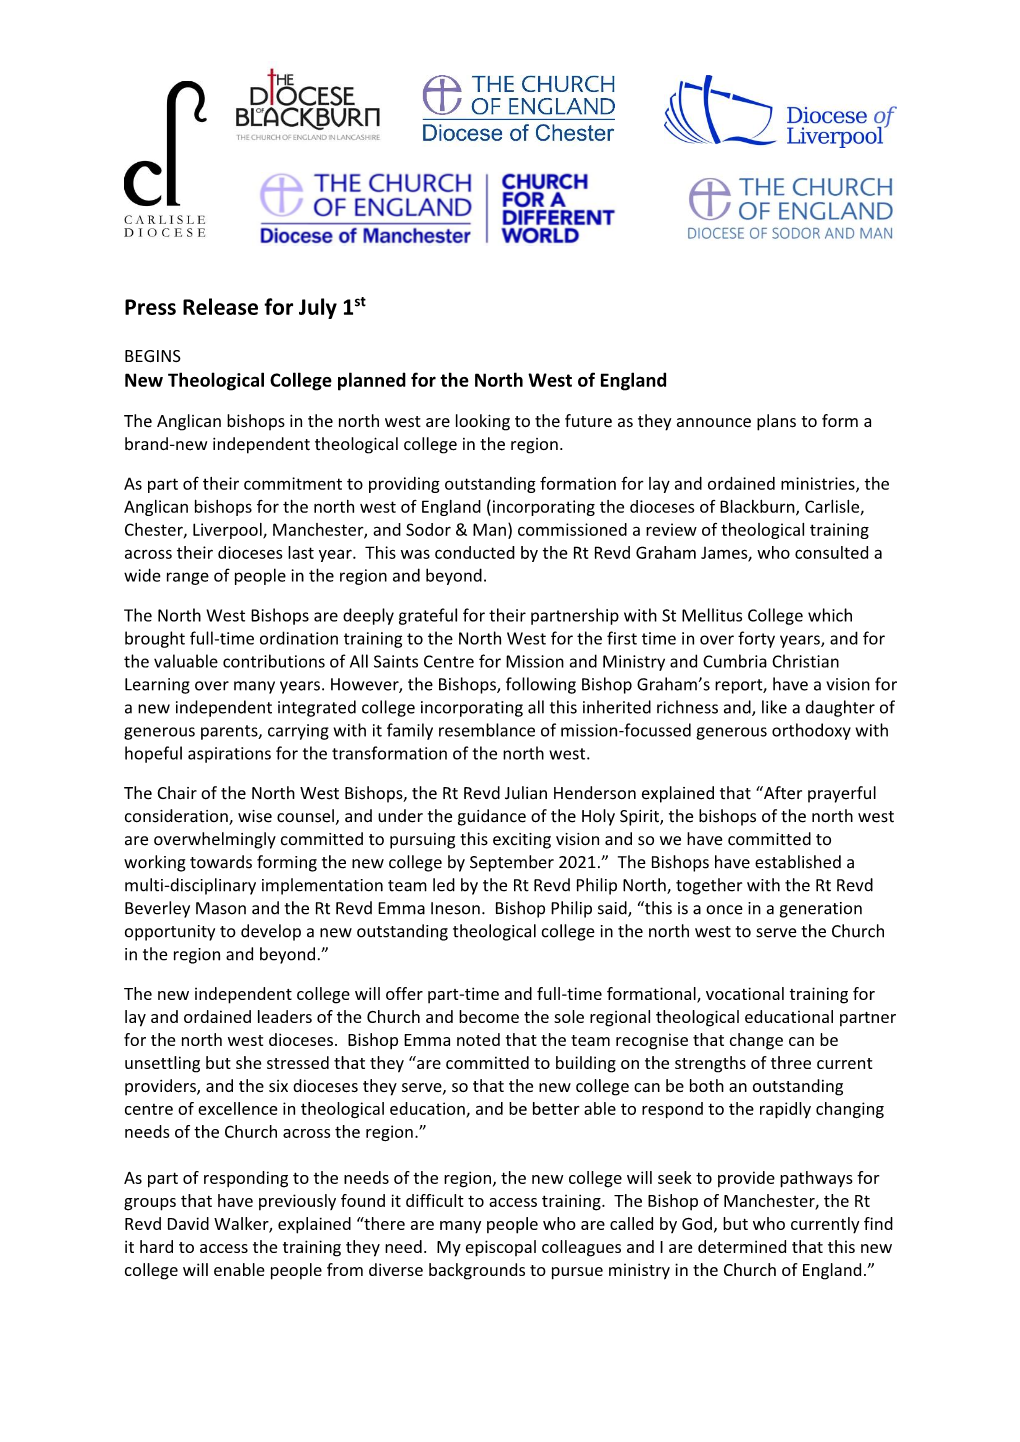 July 1 Press Release from the Anglican Bishops for the North West